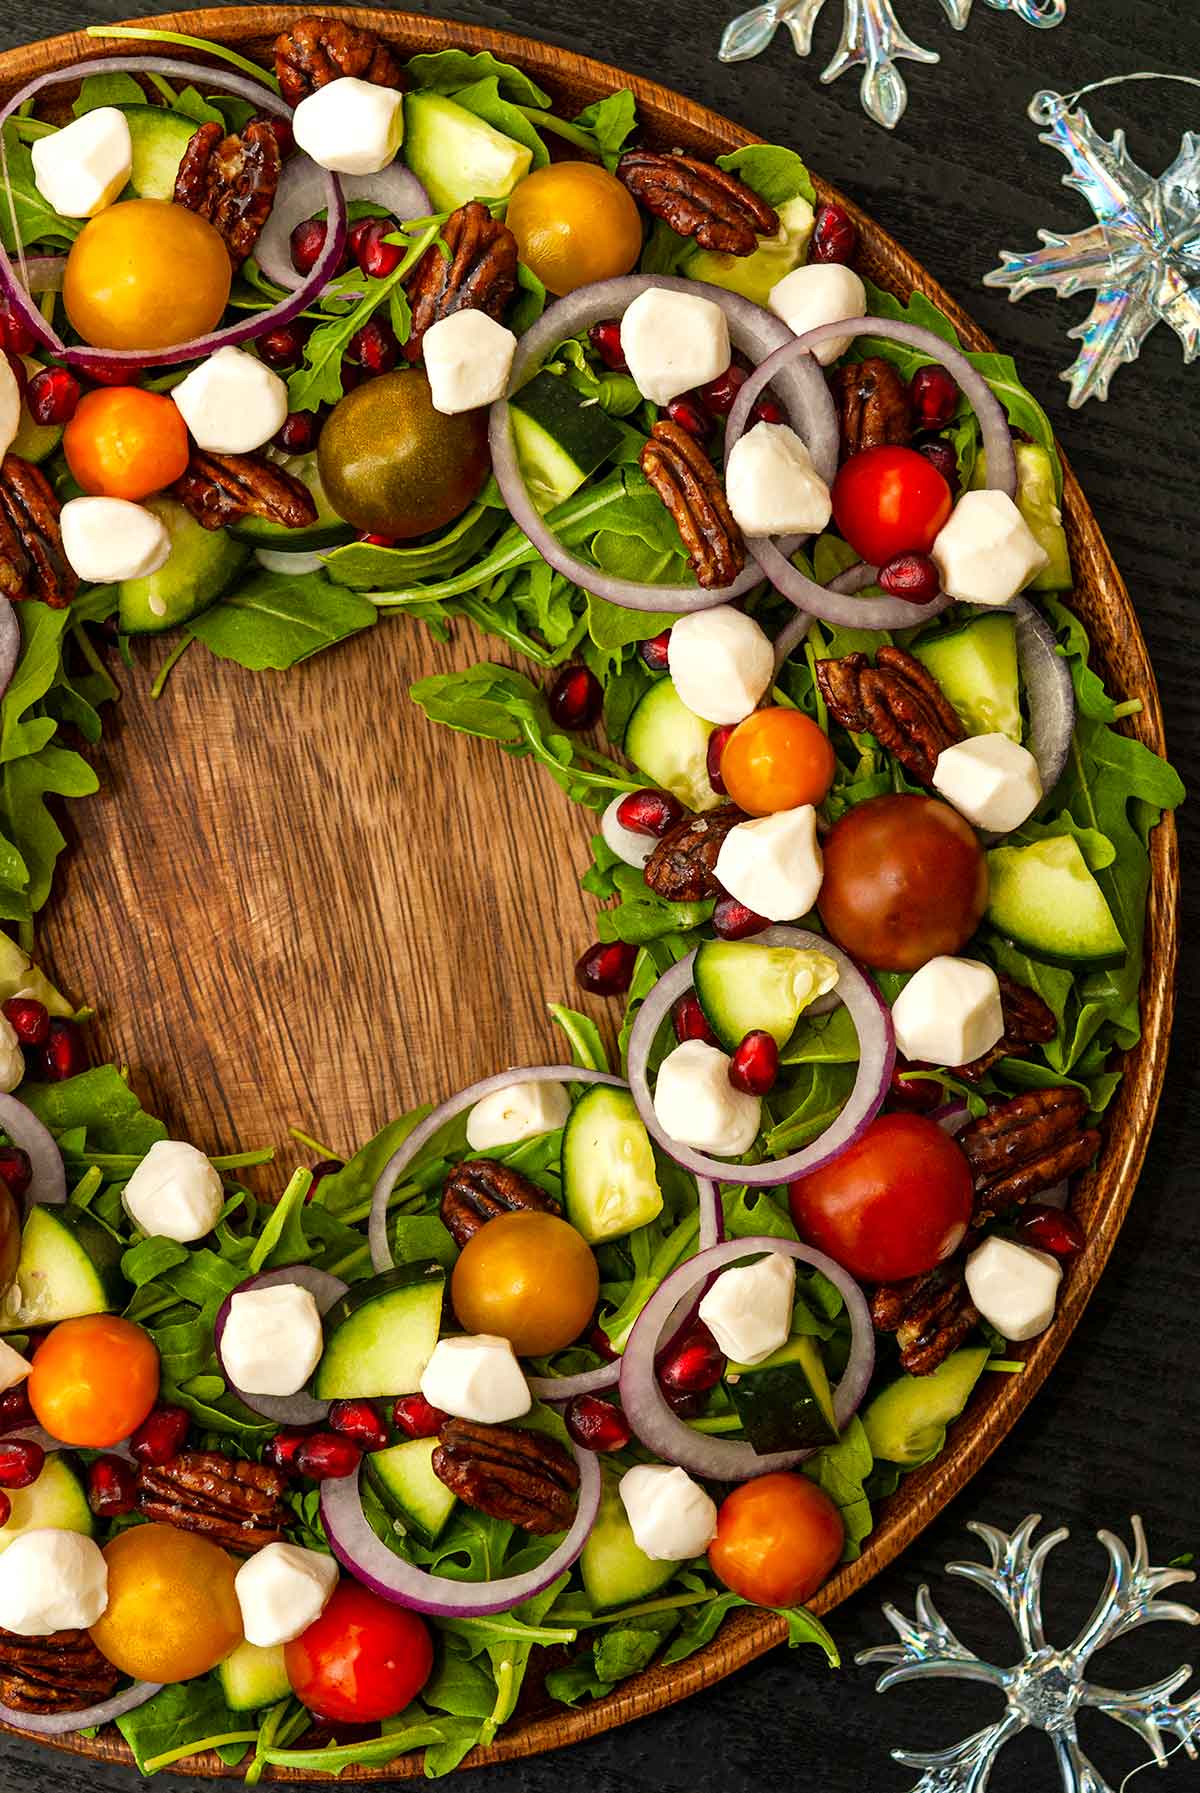 A festively assembled Christmas salad in the shape of a wreath.